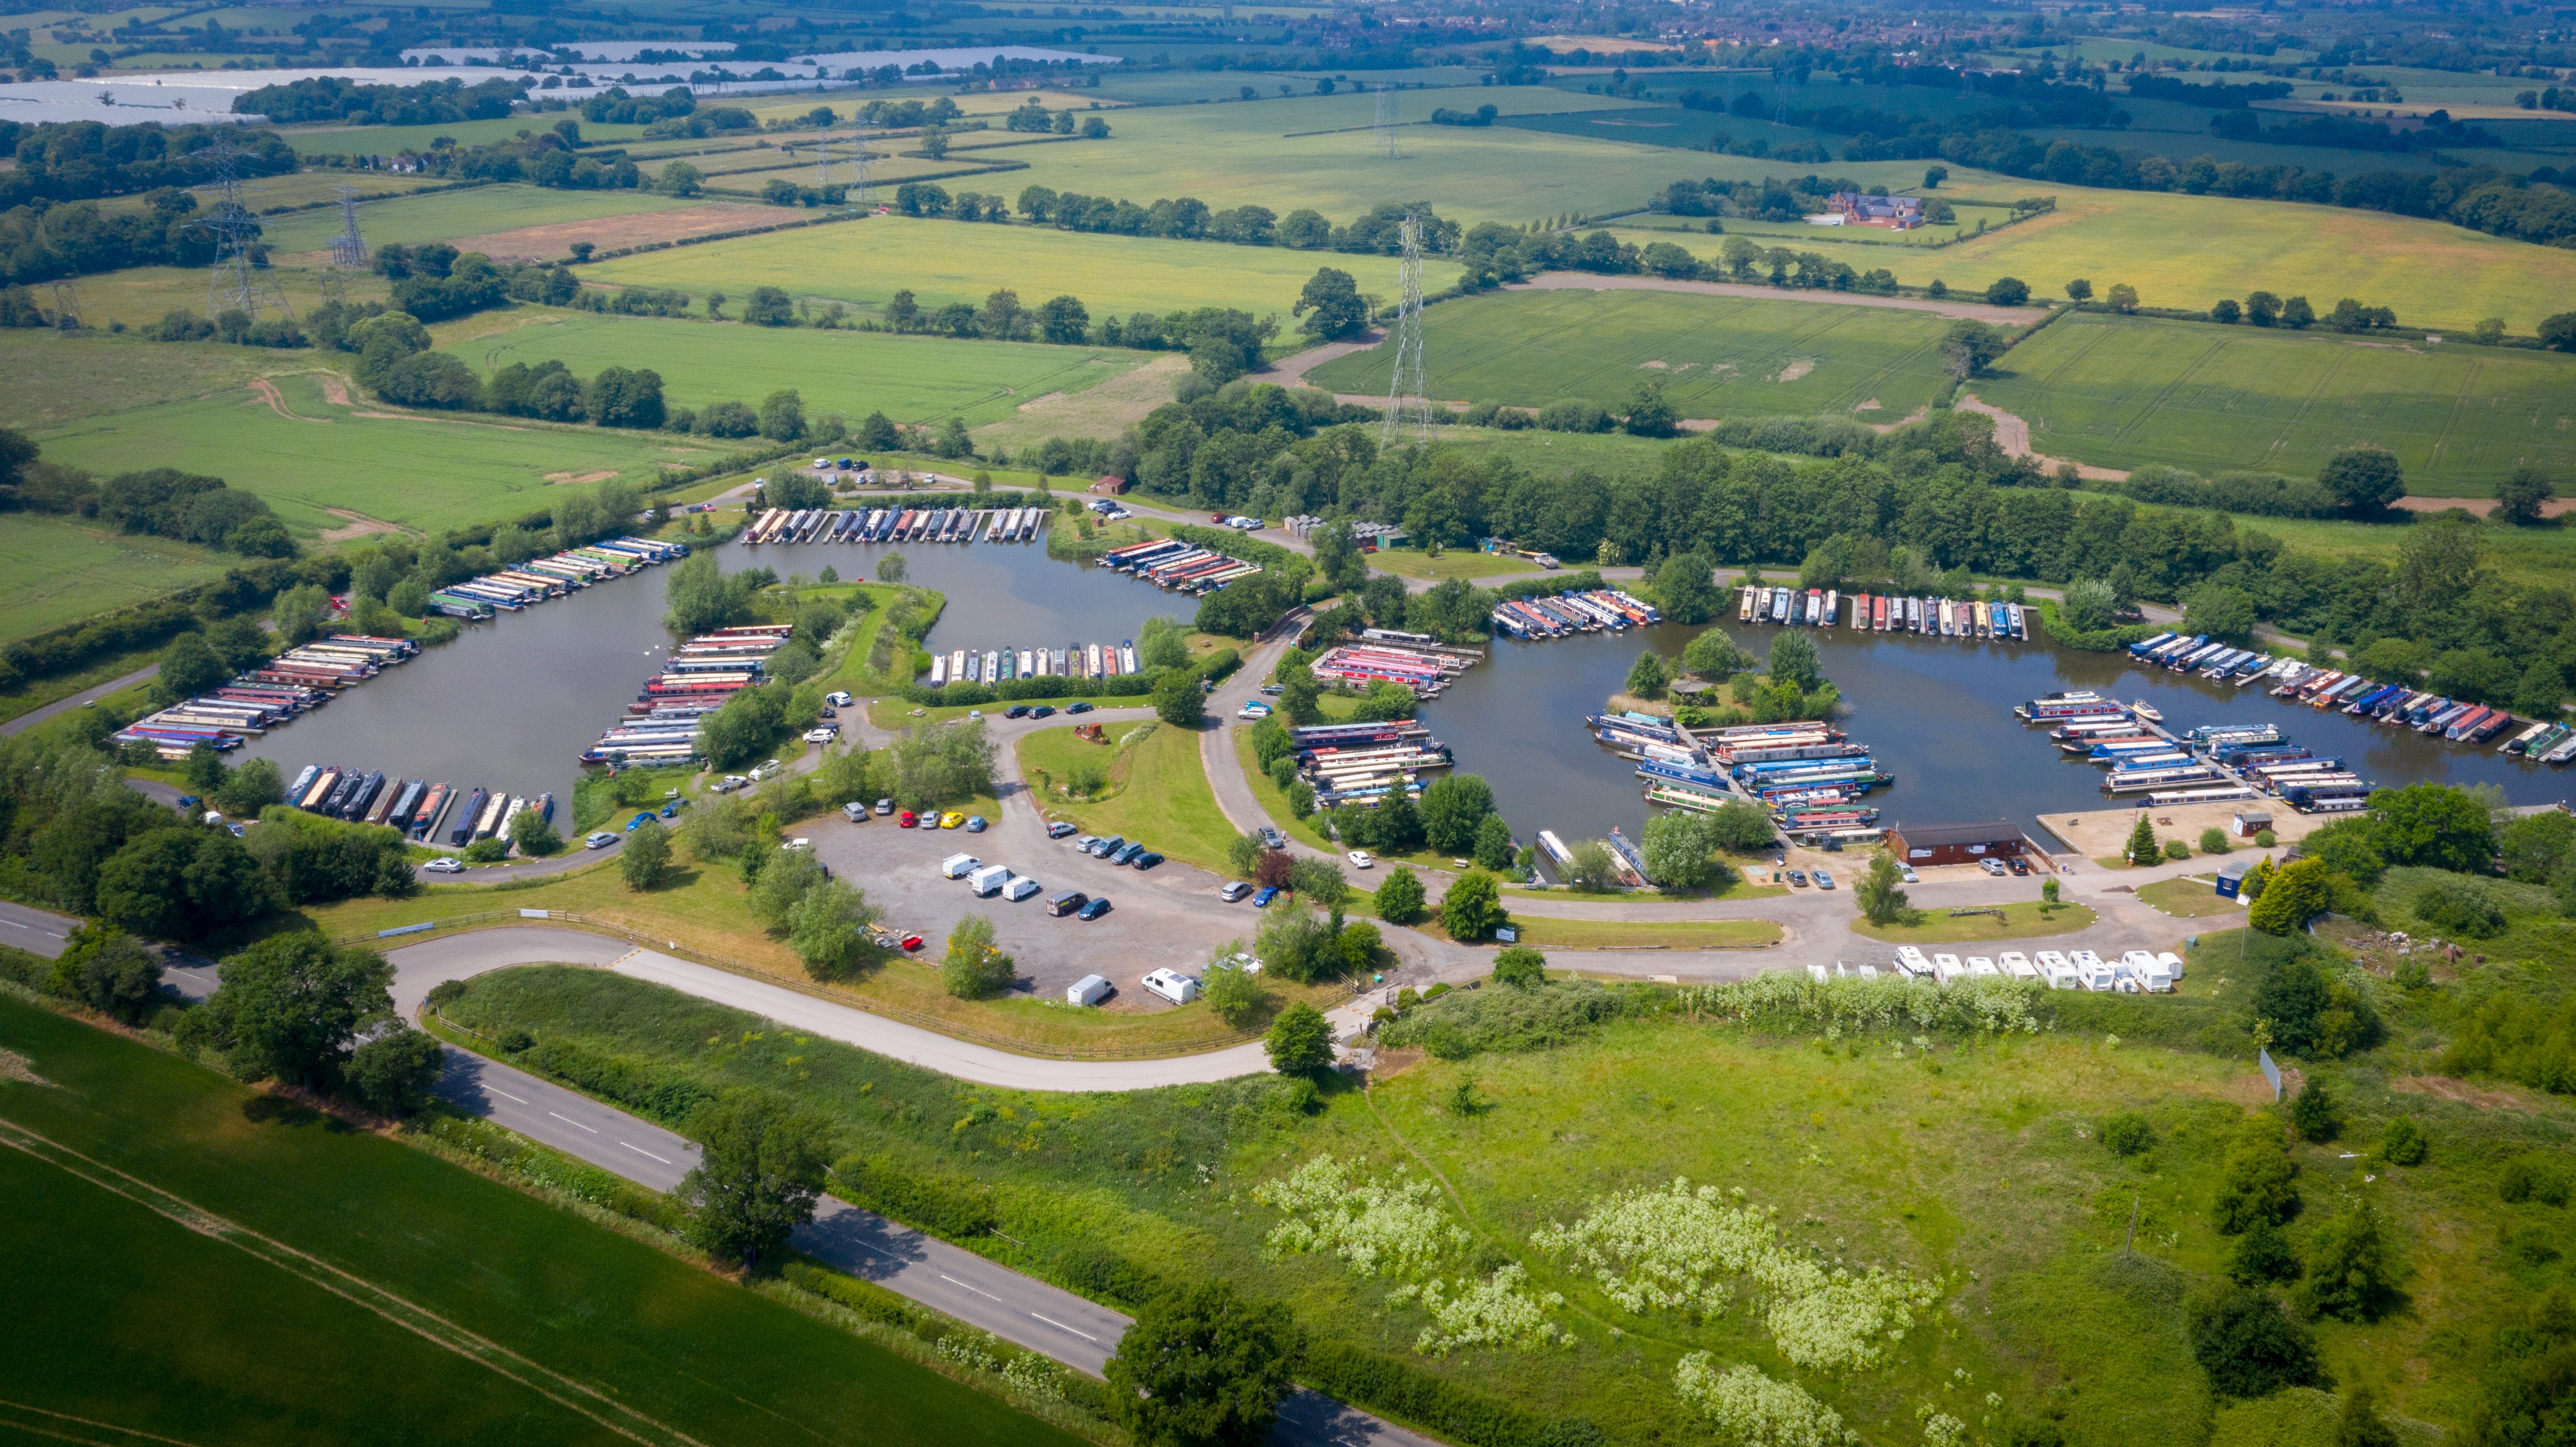 Kings Bromley Marina from the air.